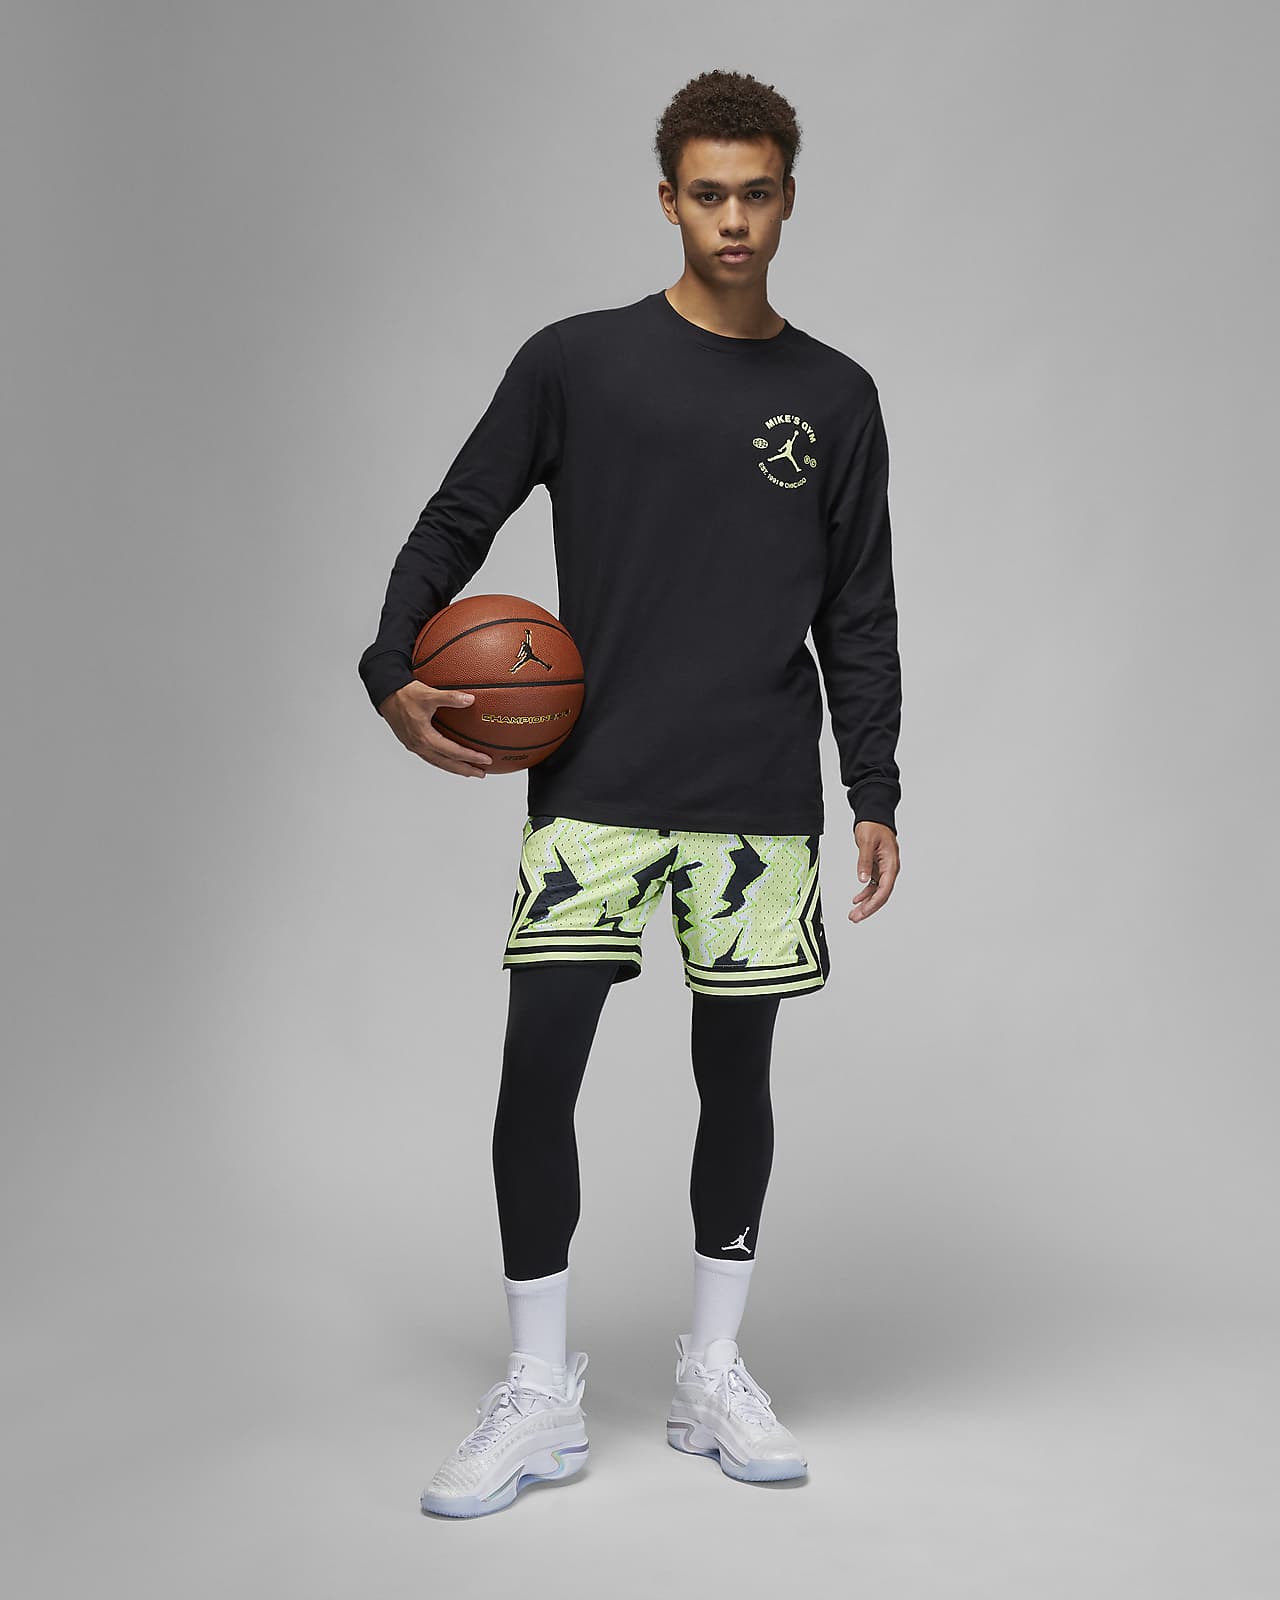 Shop Nike Leggings Basketball For Men with great discounts and